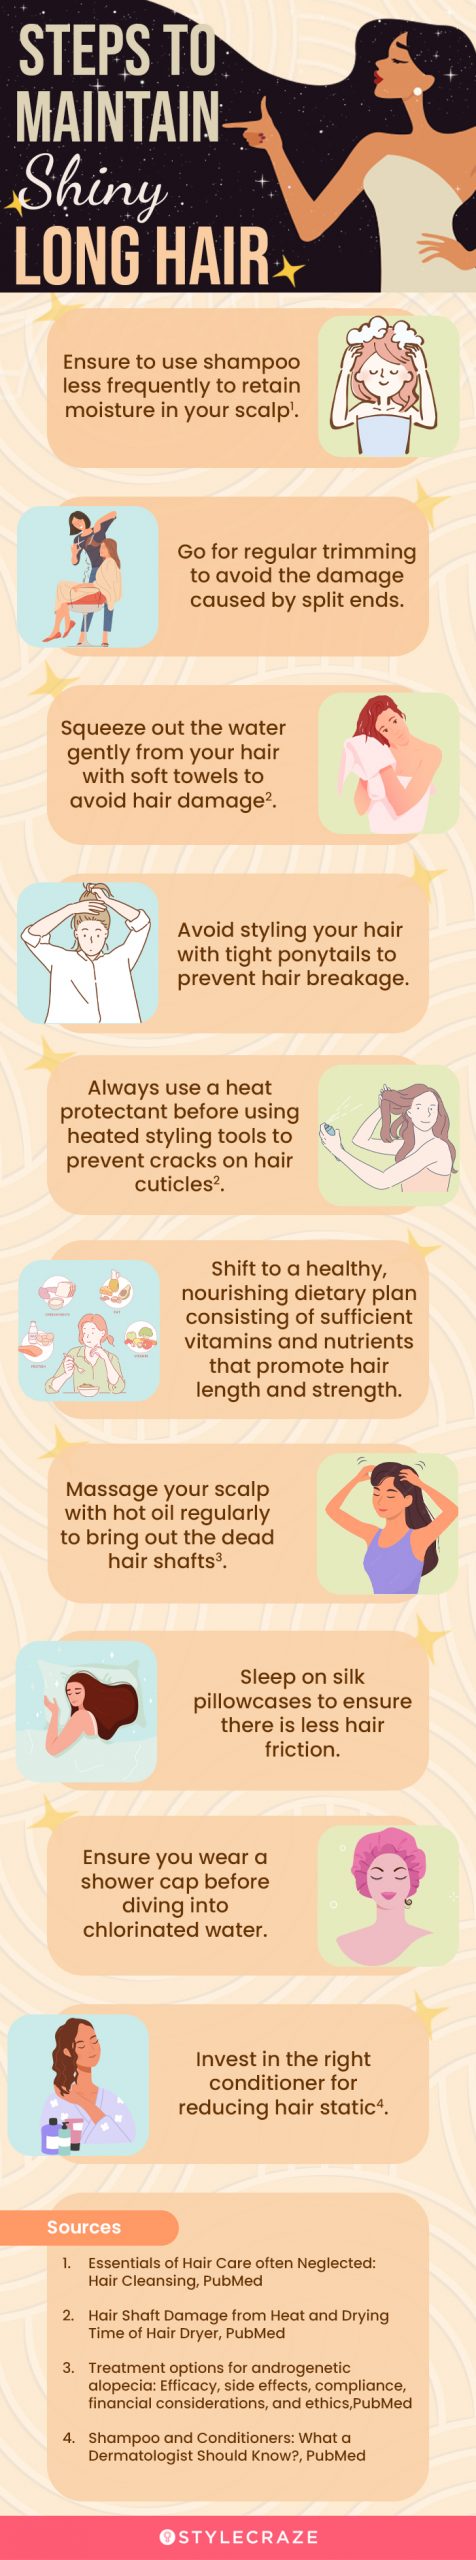 steps to maintain shiny long hair [infographic]